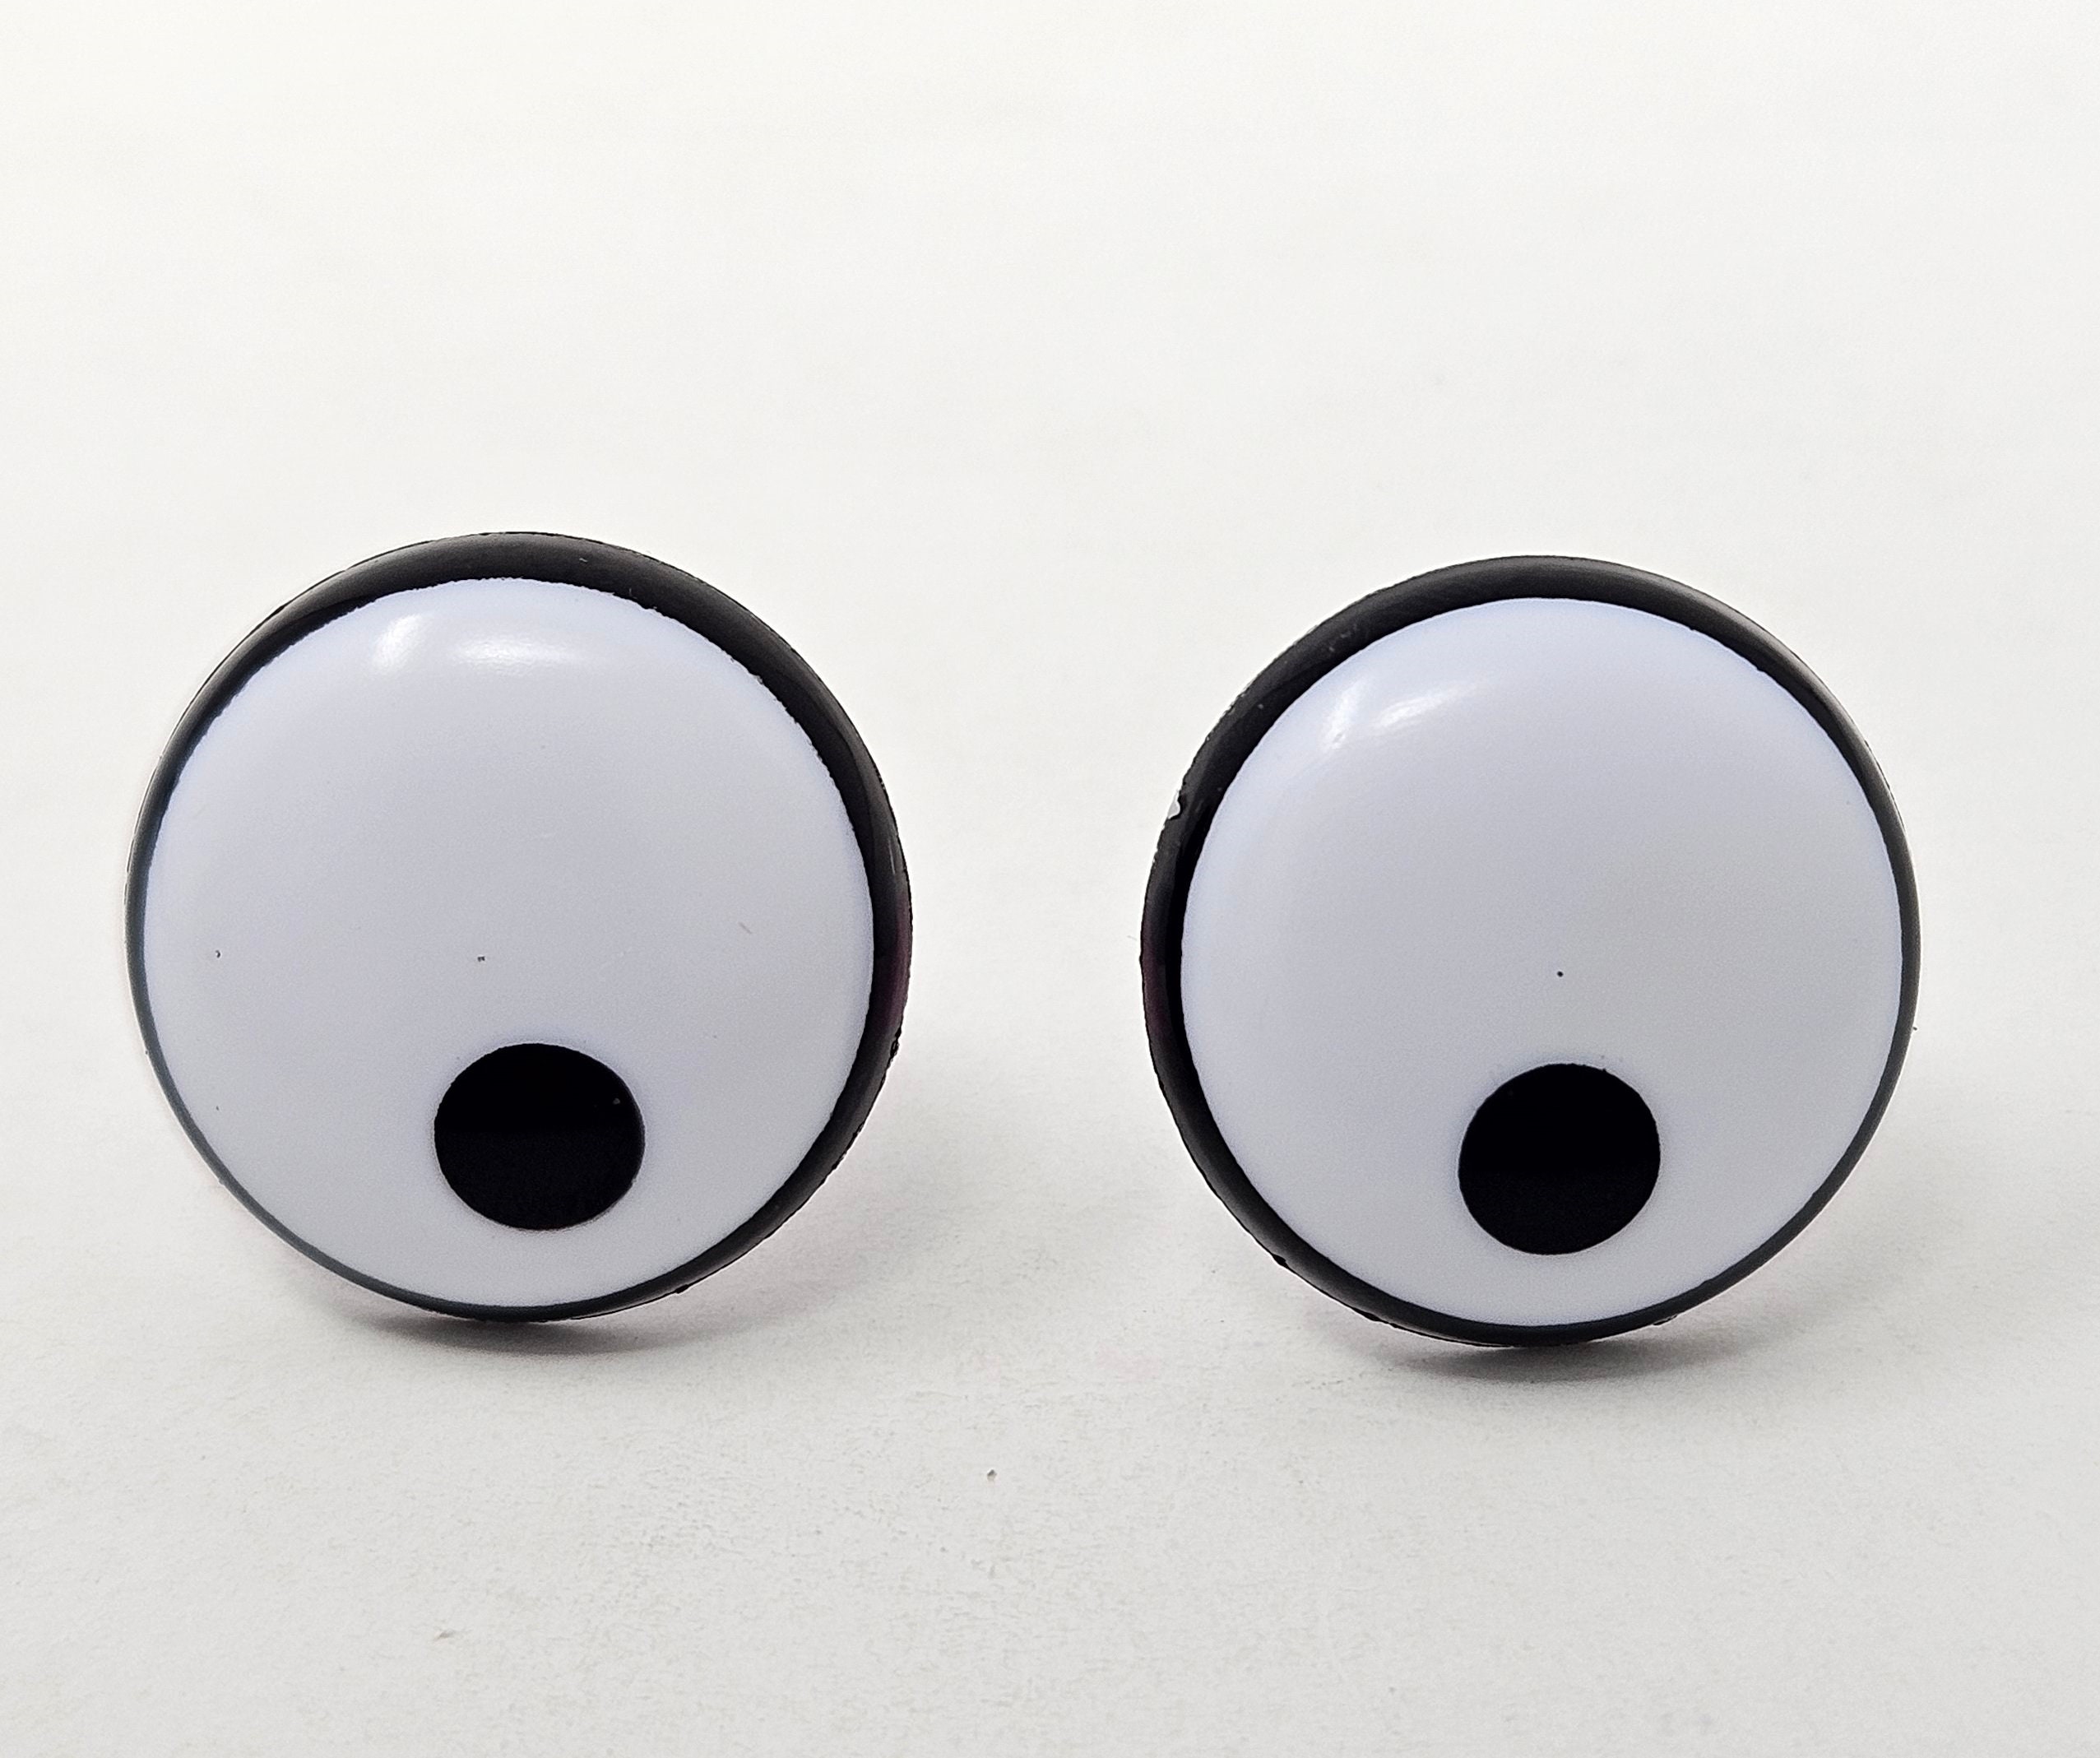 4x6mm Black Oval Safety Nose/eyes, Plastic Eyes for Stuffed